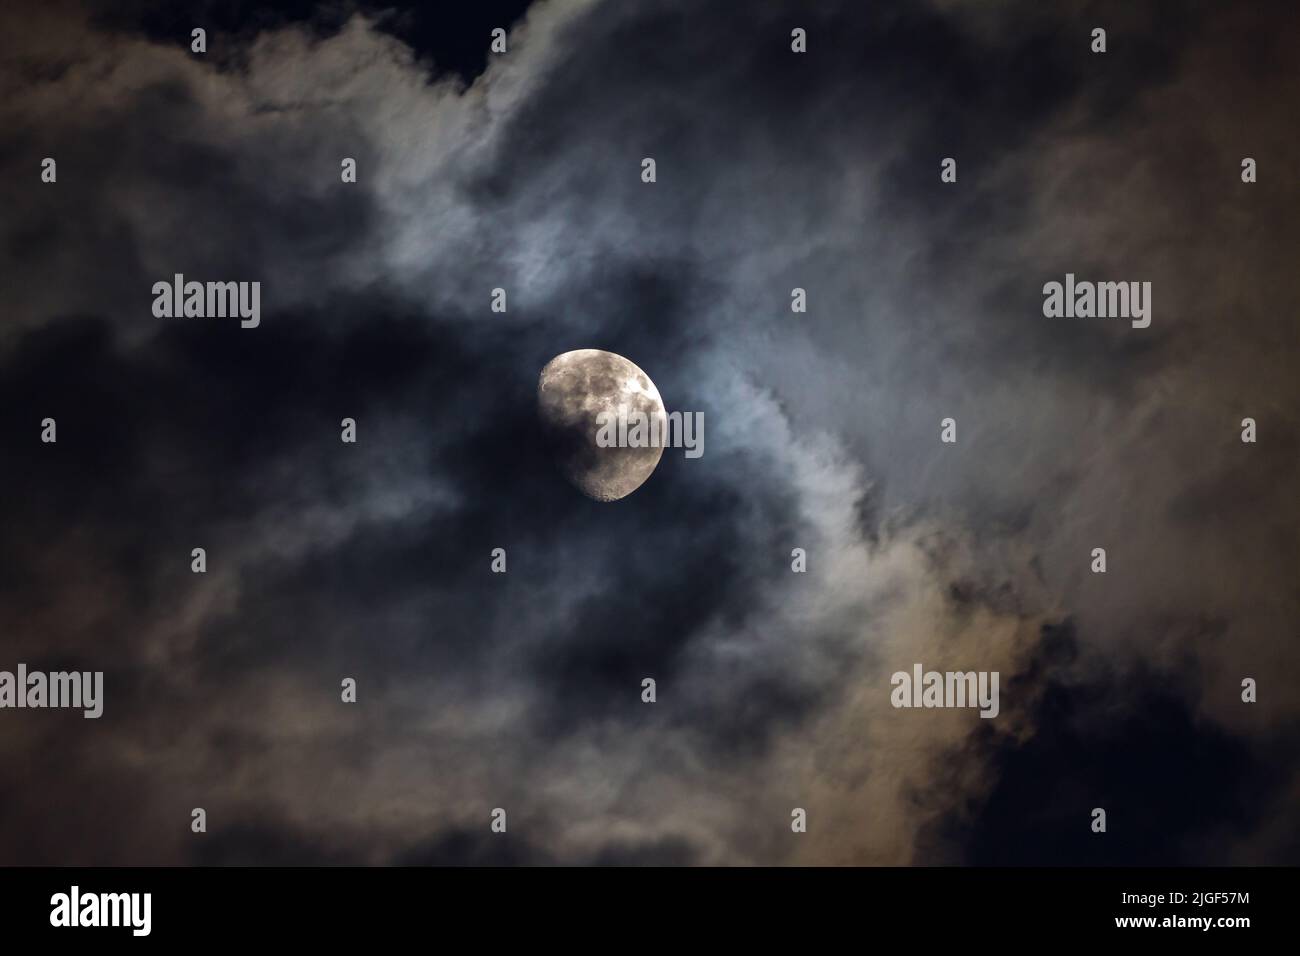 A three-quarter, waxing gibbous moon illuminates passing turbulent clouds in a night sky. Stock Photo